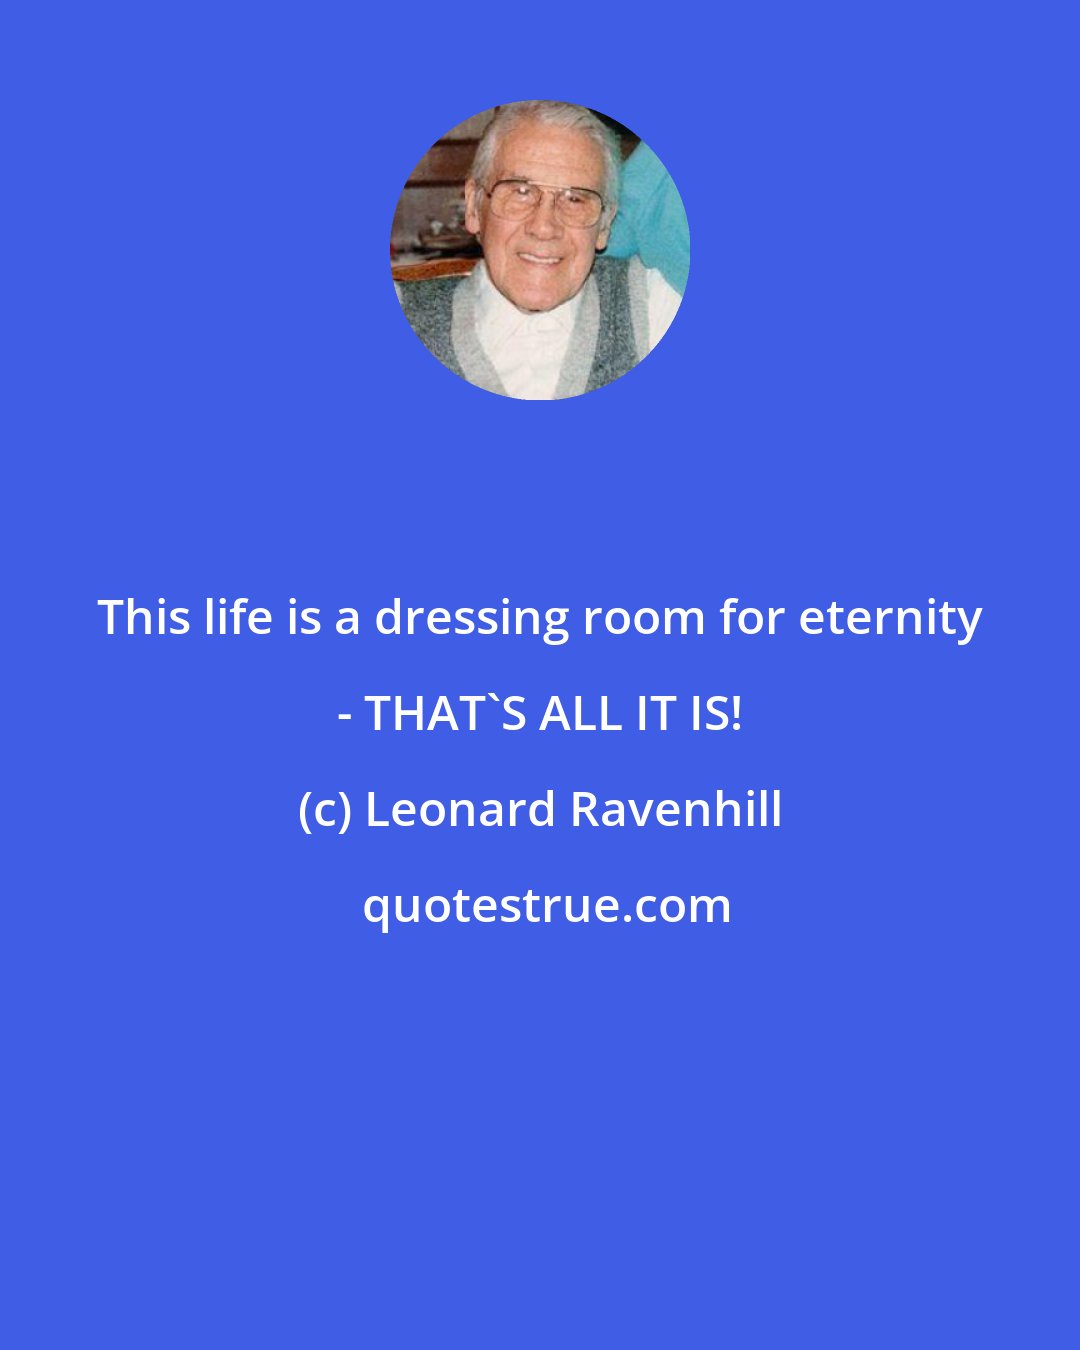 Leonard Ravenhill: This life is a dressing room for eternity - THAT'S ALL IT IS!